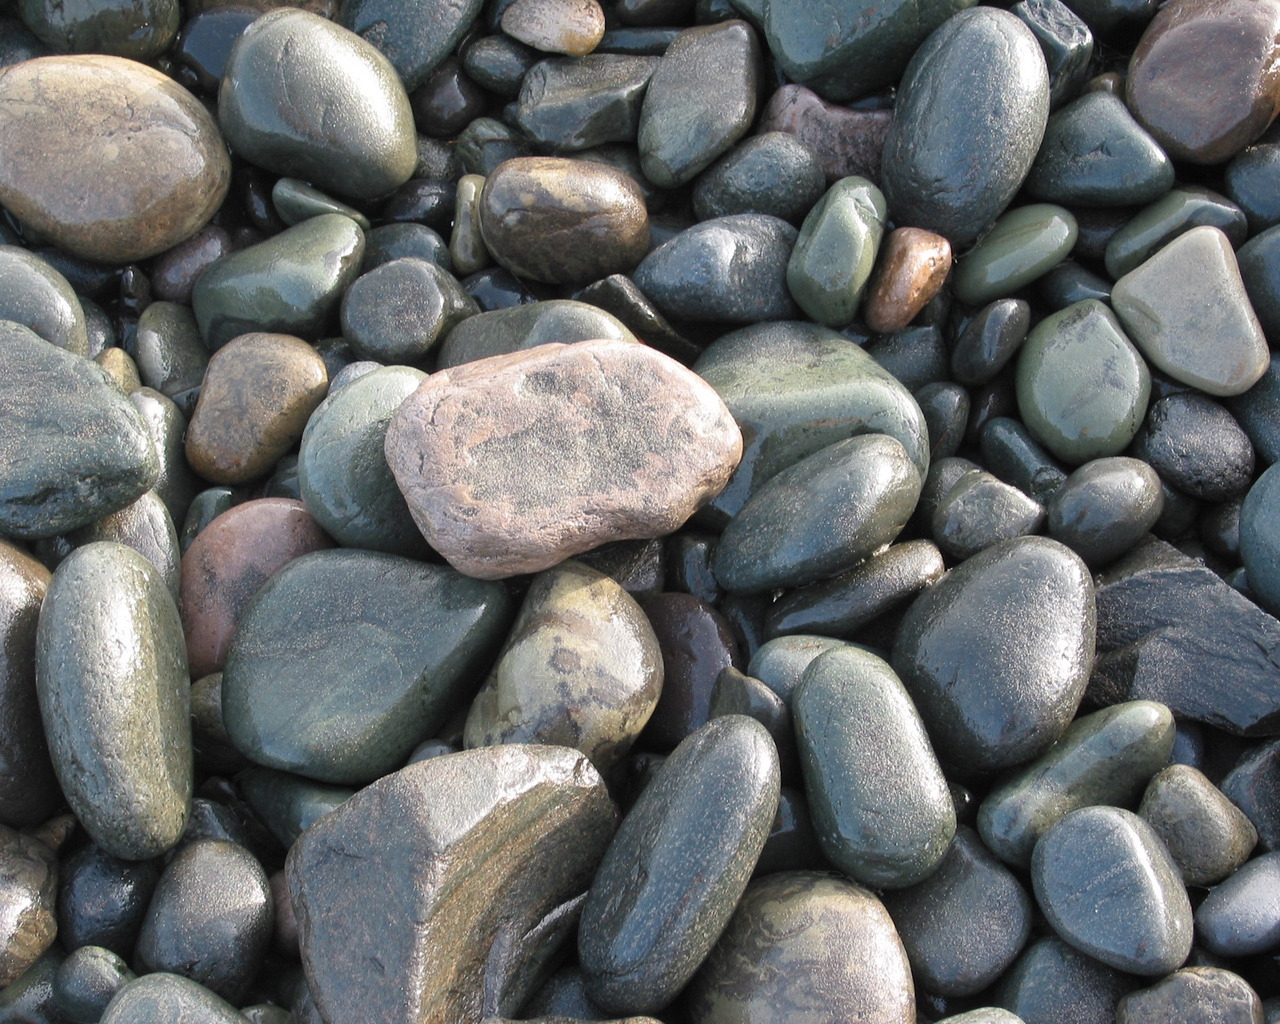 Wet Stones for 1280 x 1024 resolution